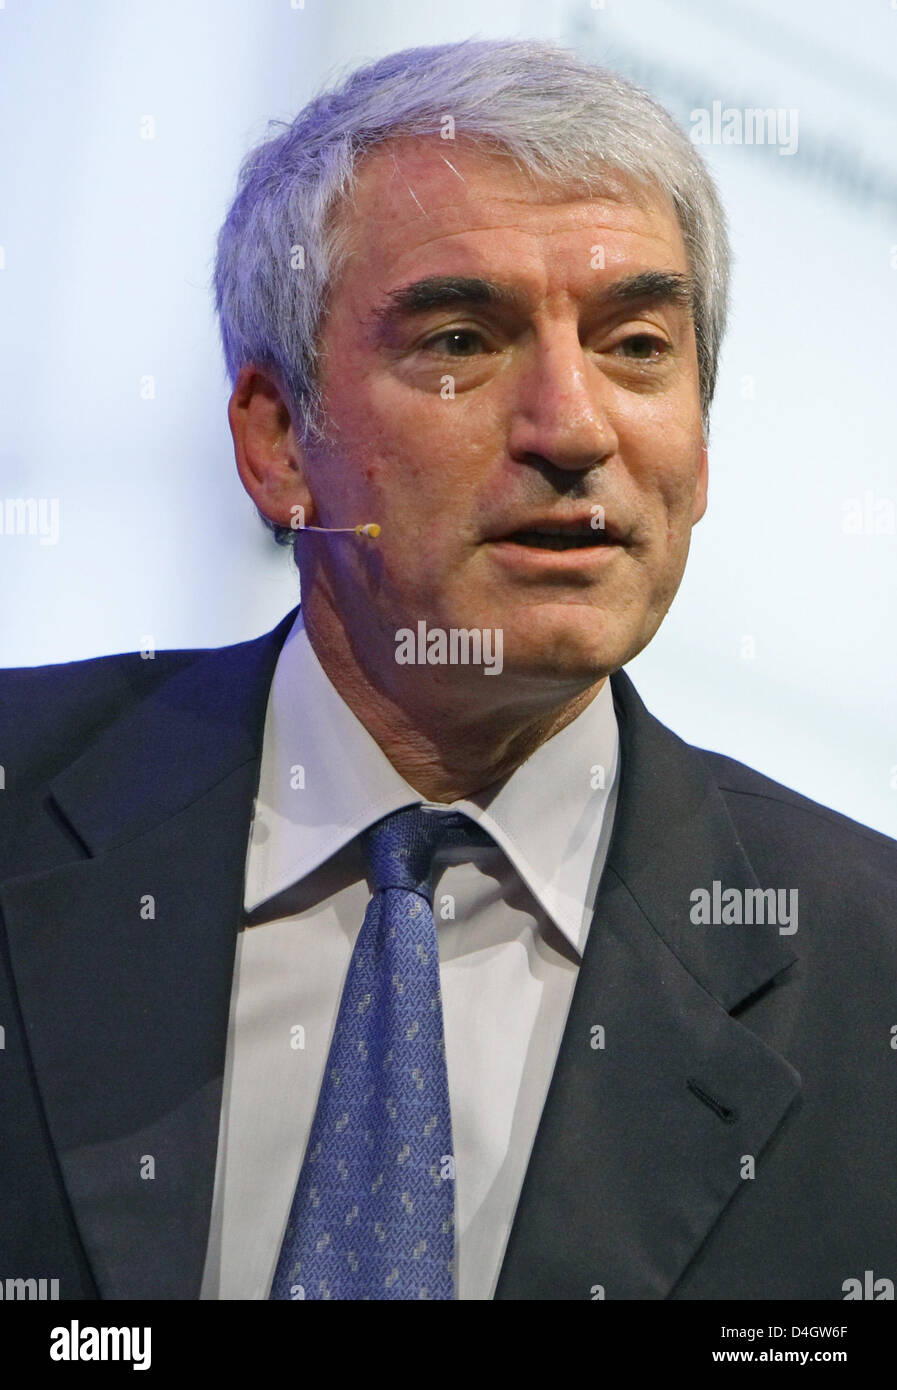 Marc Boudier, Europe Director of 'Electricite de France' (EDF), seen at a press conference in Stuttgart, Germany, 9th July 2008. Photo: Uwe Anspach Stock Photo